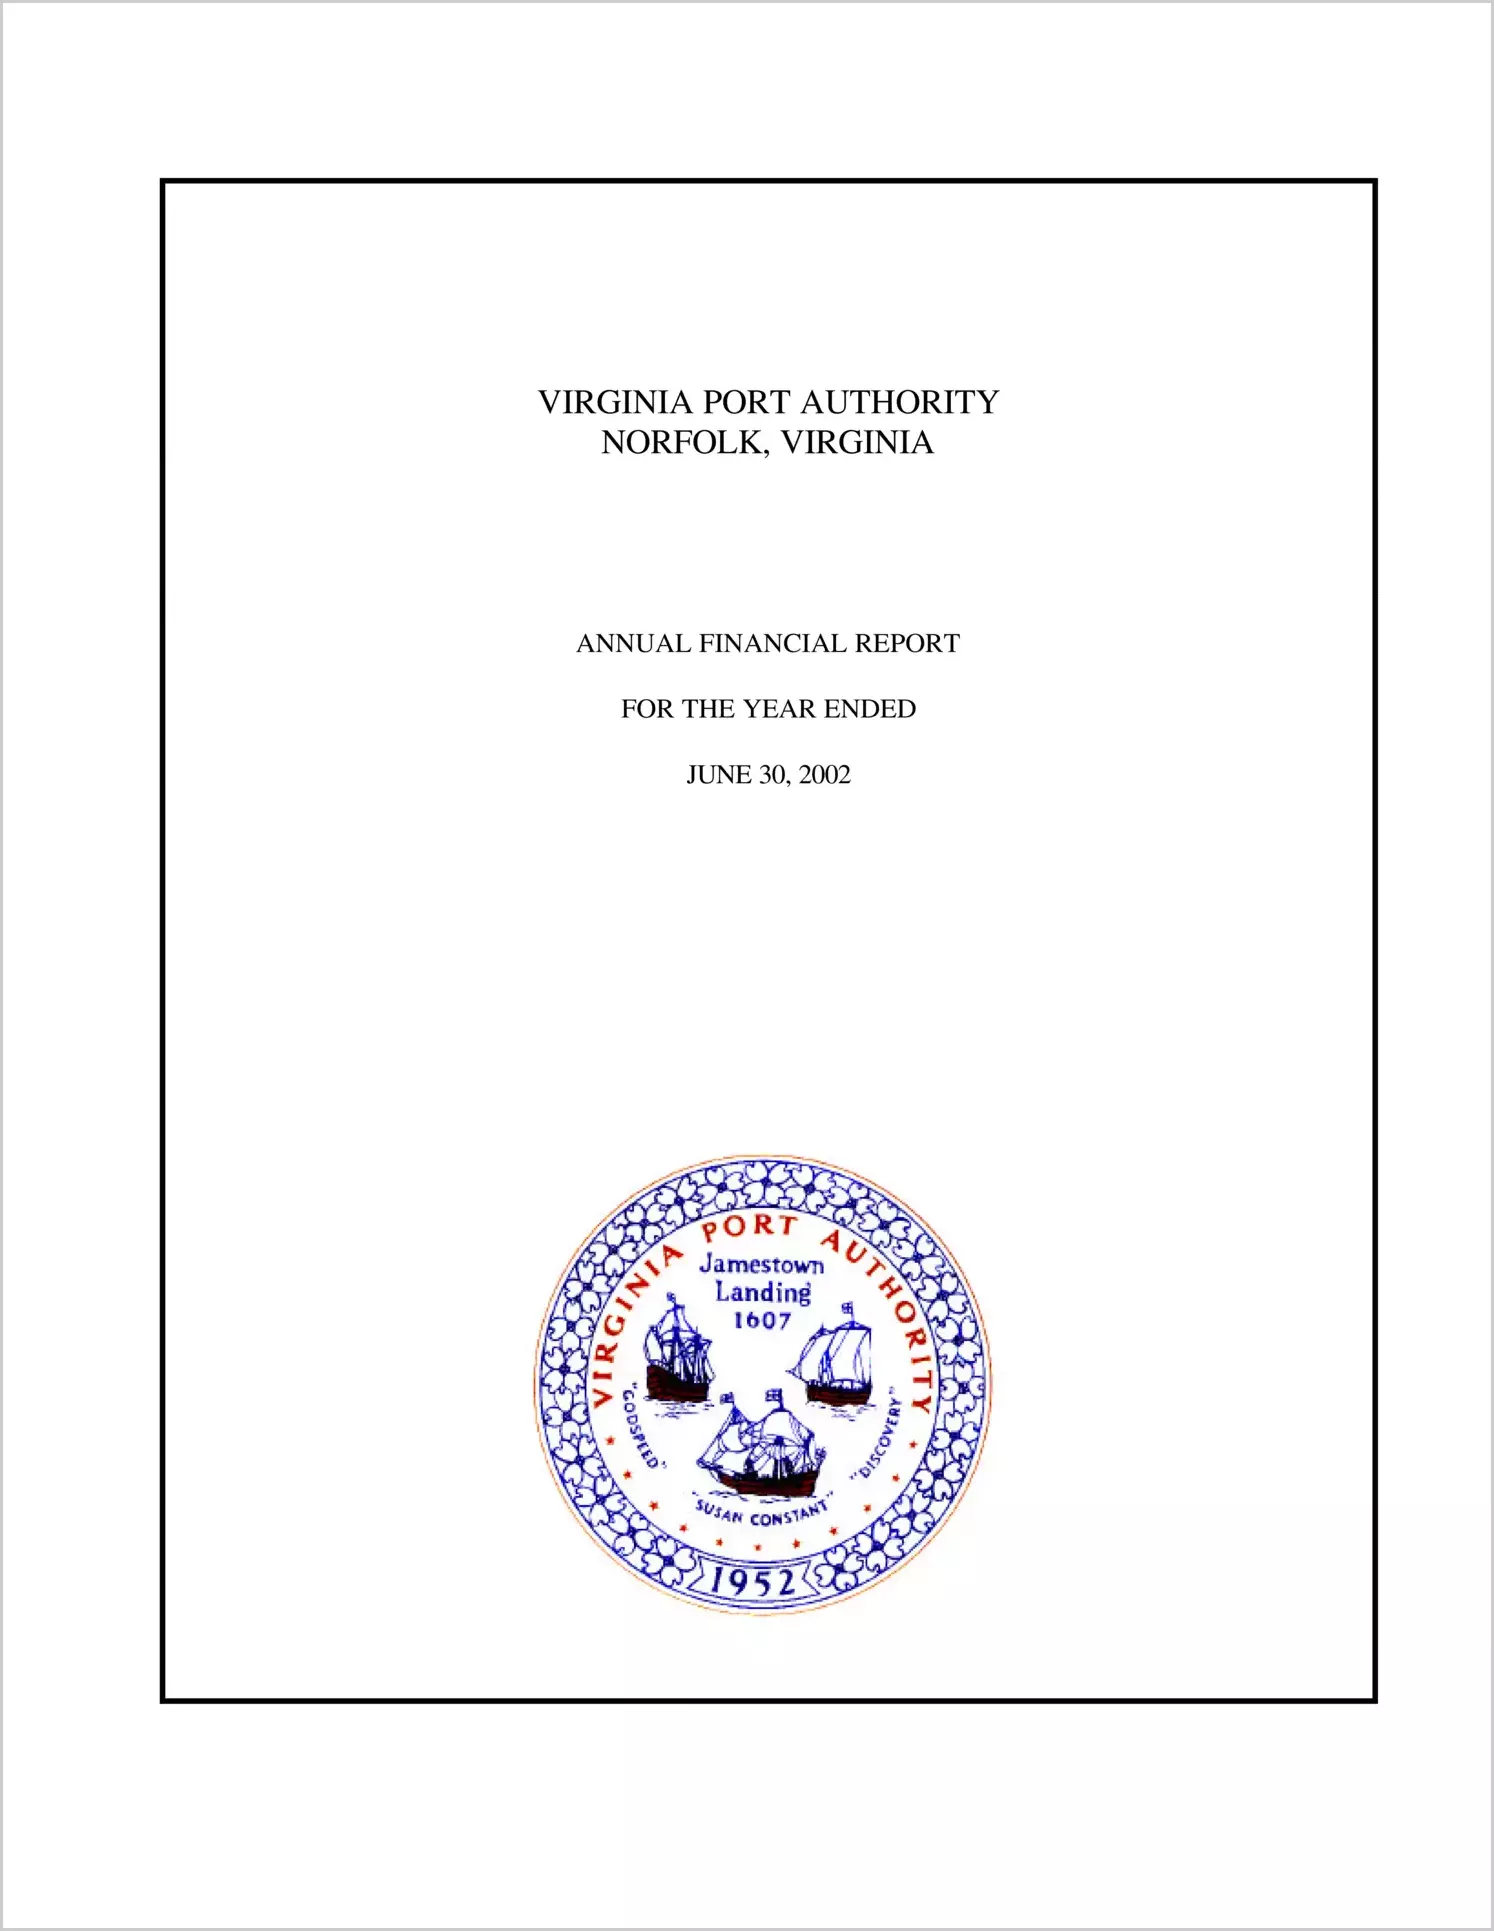 Virginia Port Authority Annual Financial Report for the year ended June 30, 2002